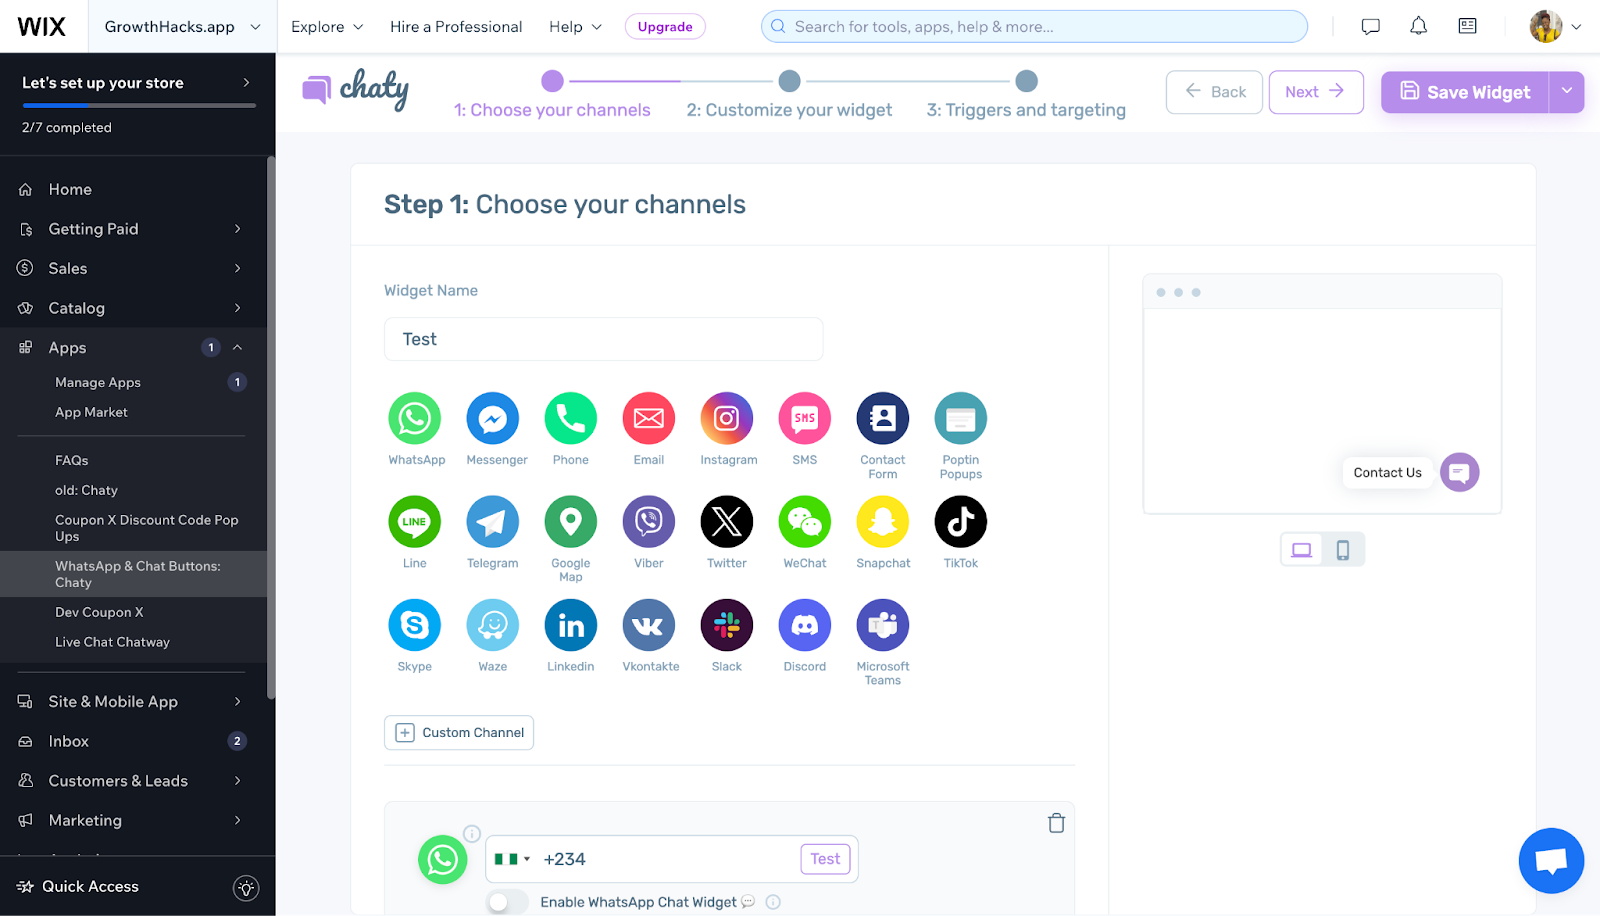 Chaty showing available channels for communication including WhatsApp and Facebook Messenger.